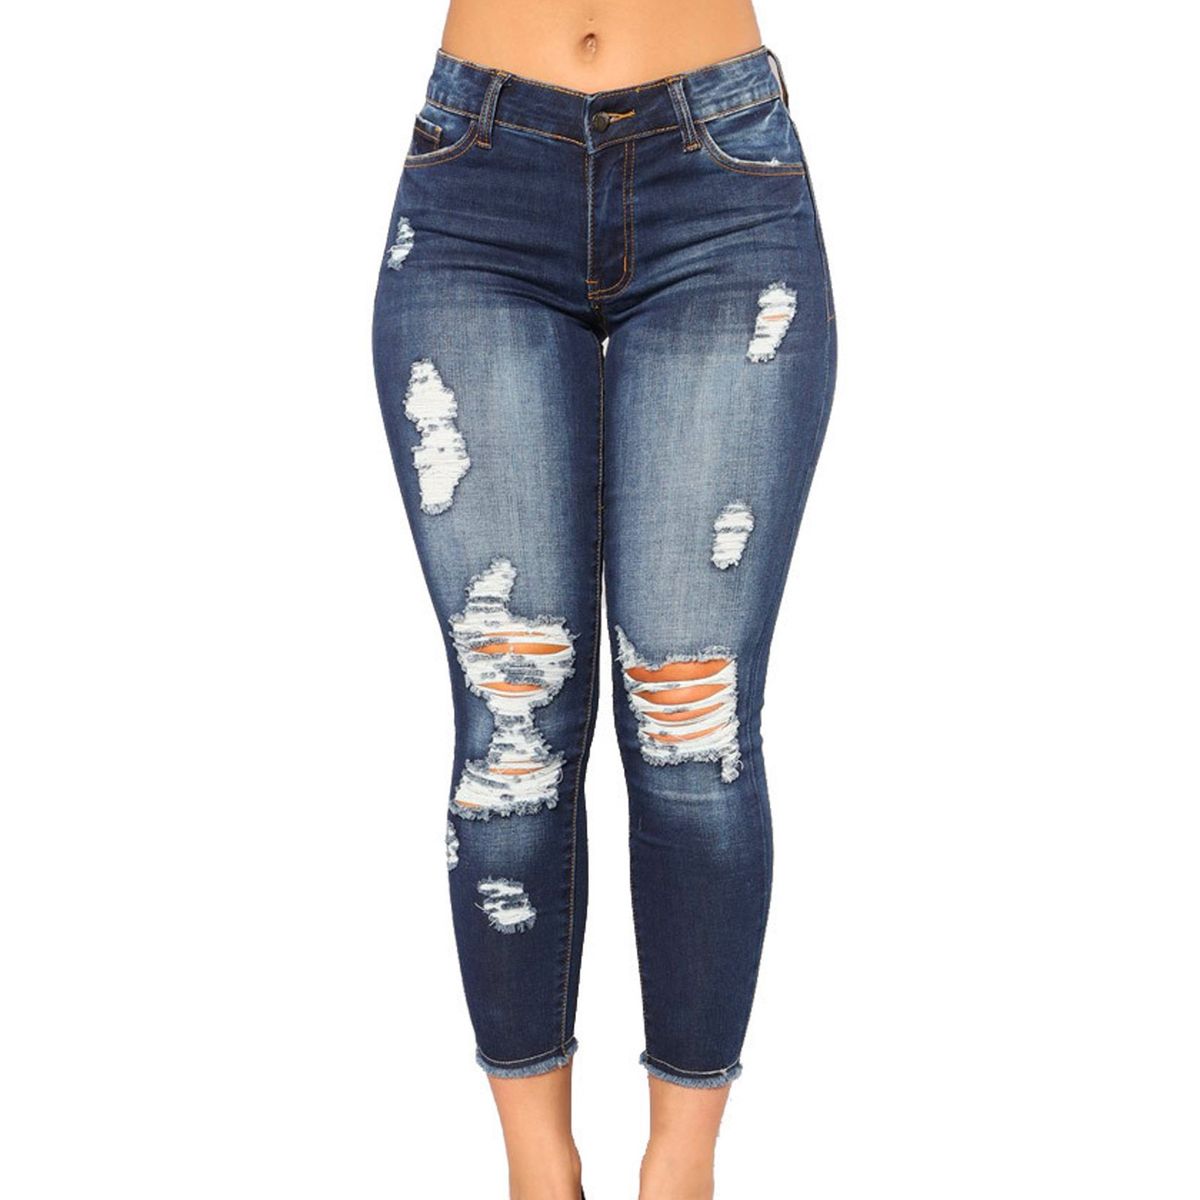 Ripped Skinny Jeans For Women - Dark Blue | Shop Today. Get it Tomorrow ...